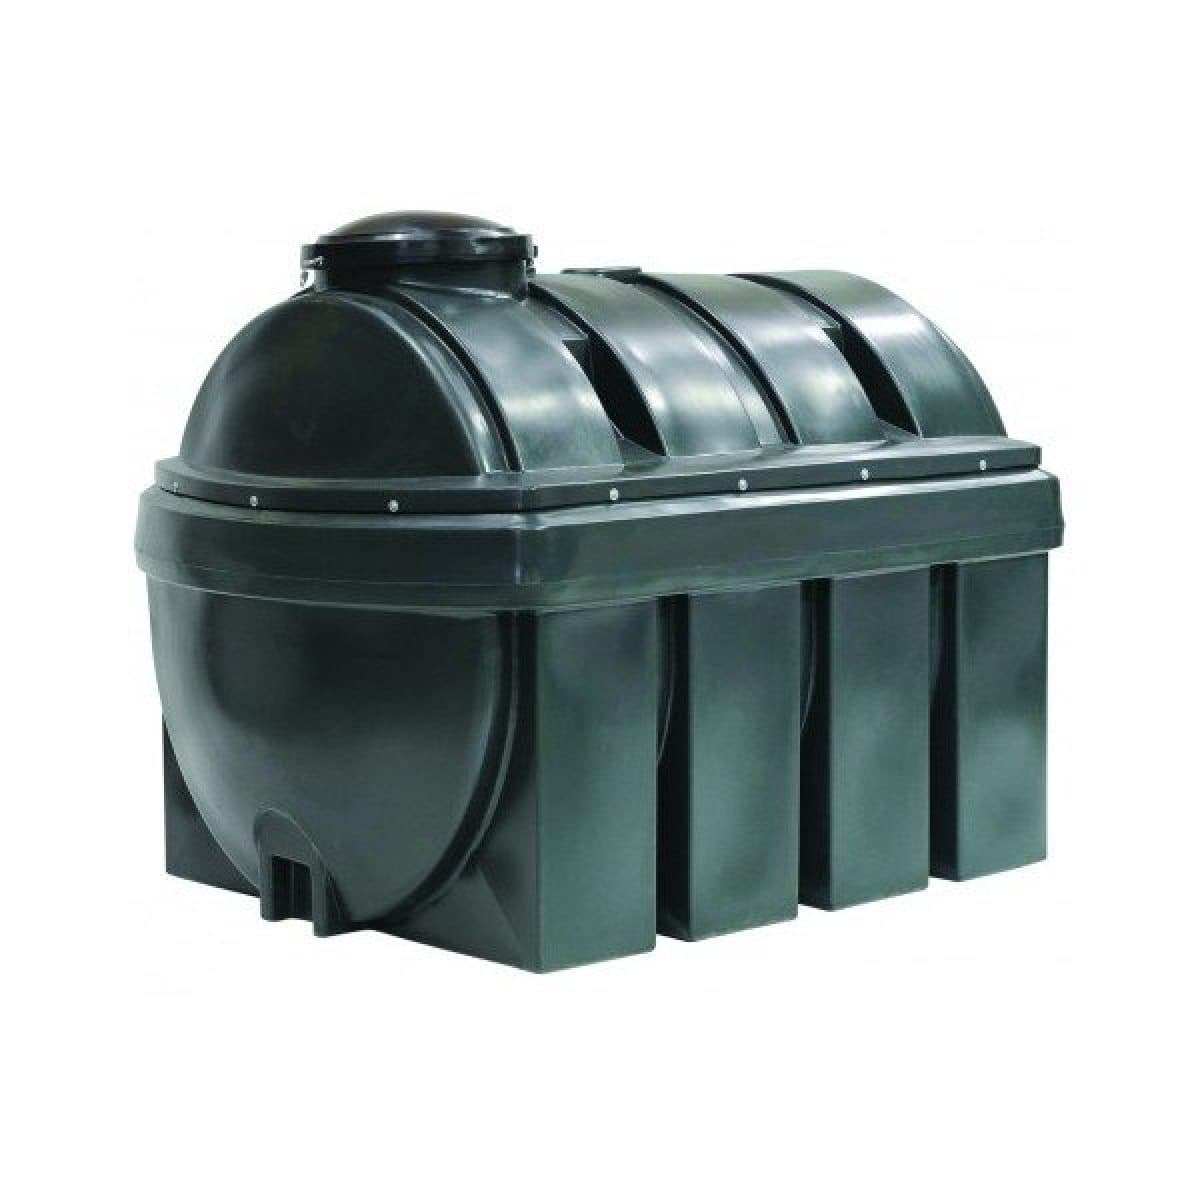 What is a bunded oil tank